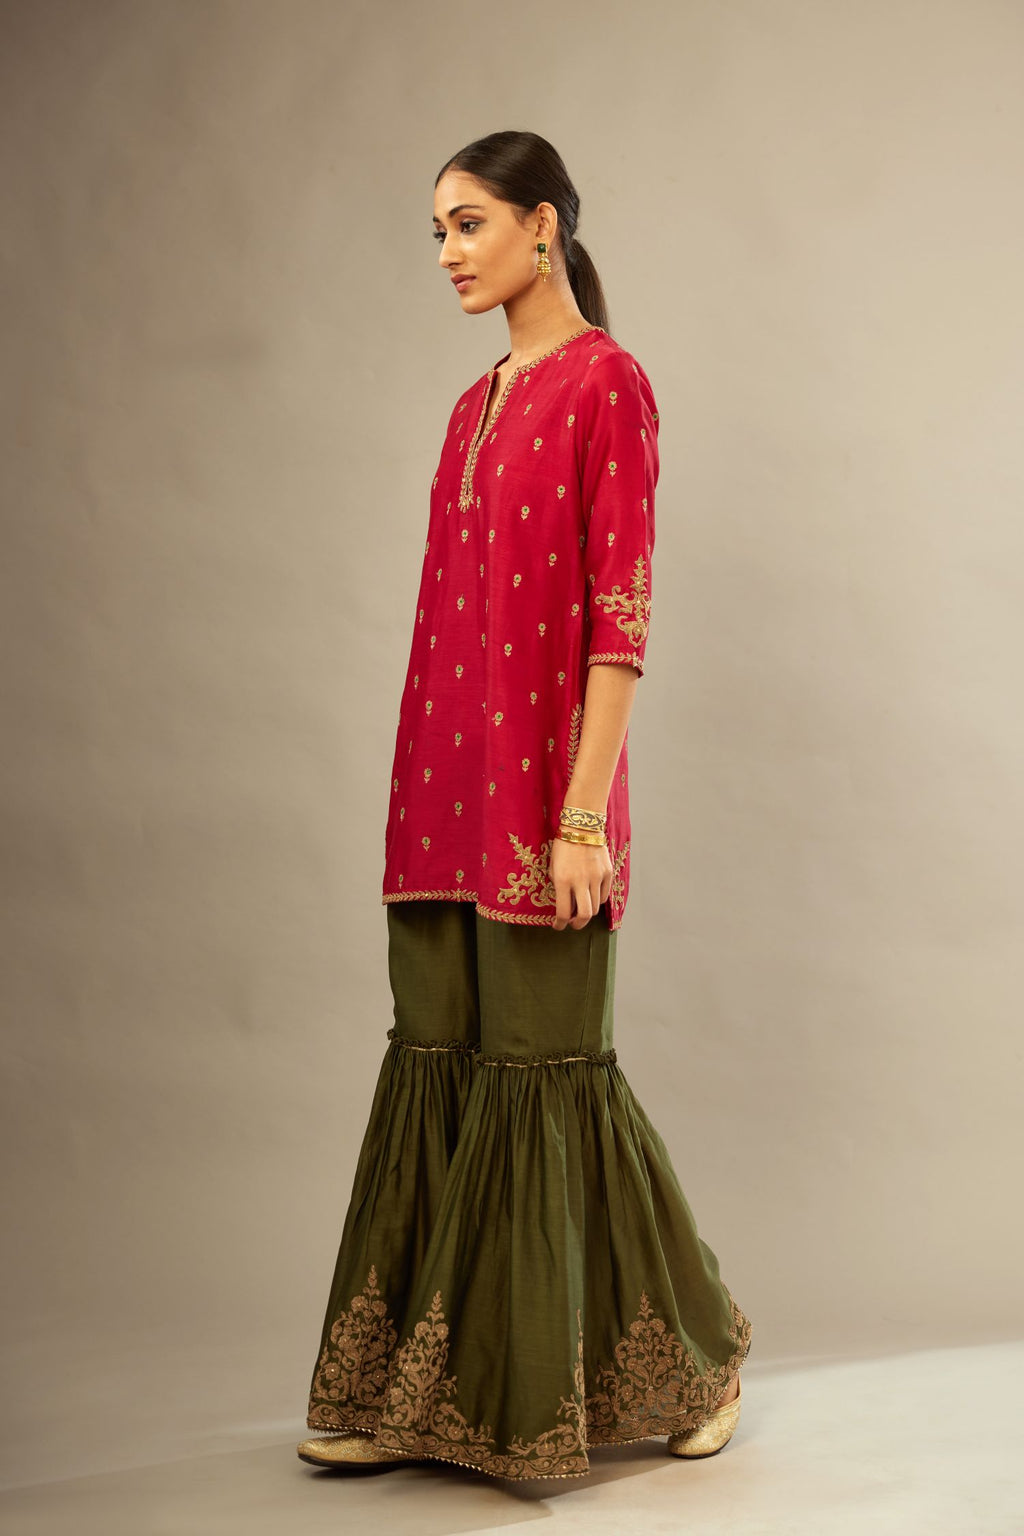 Fuchsia silk chanderi short kurta set with all-over silk thread jaal embroidery, detailed with gold dori embroidery.